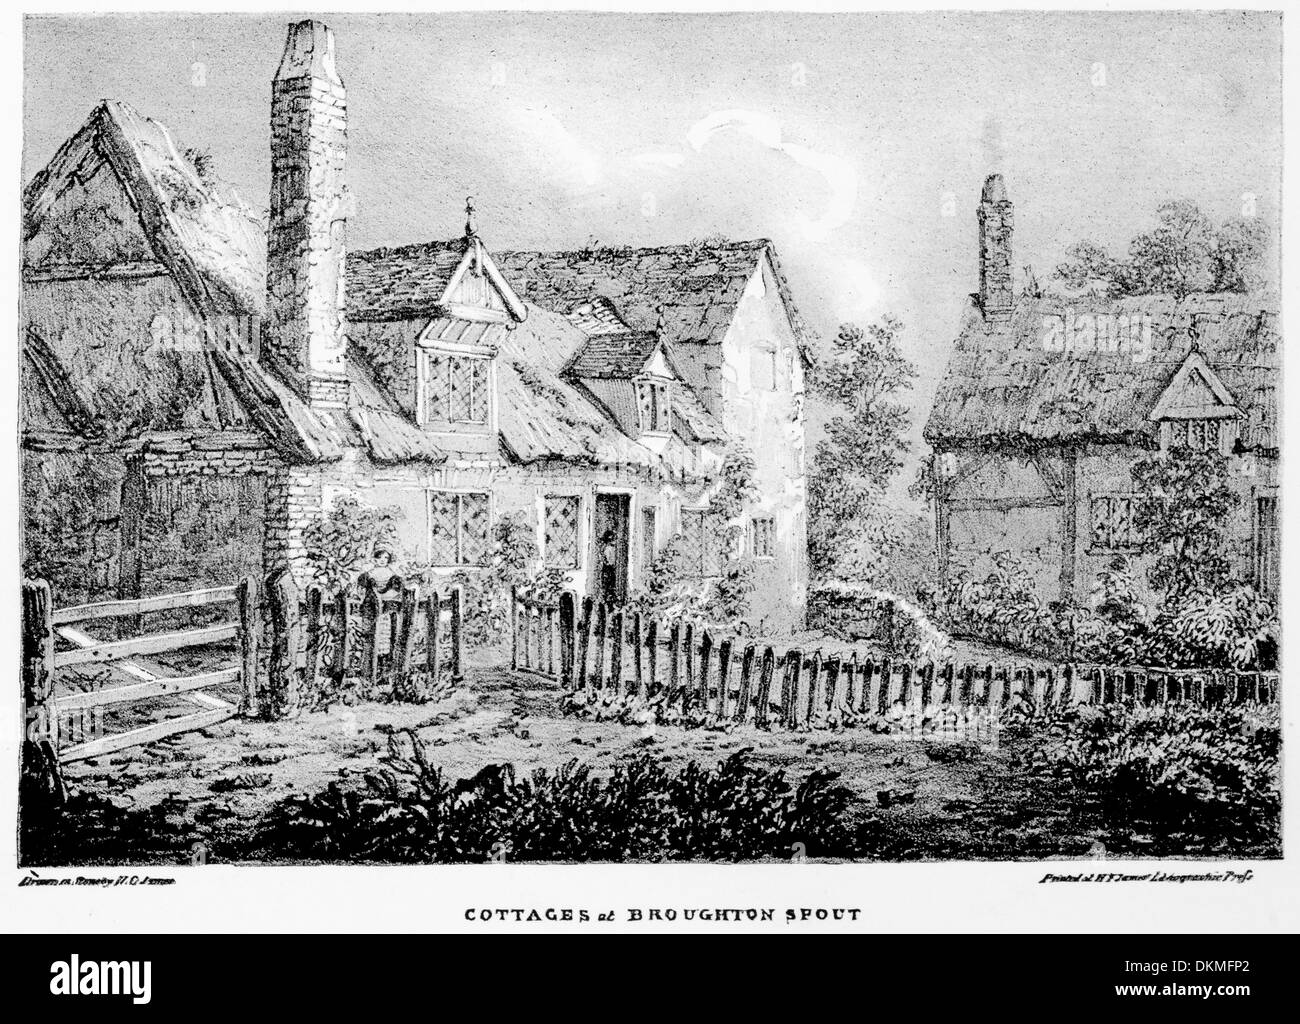 Copy of Lithographic print made in 1820 of Manchester Cottages at Broughton Spout Stock Photo